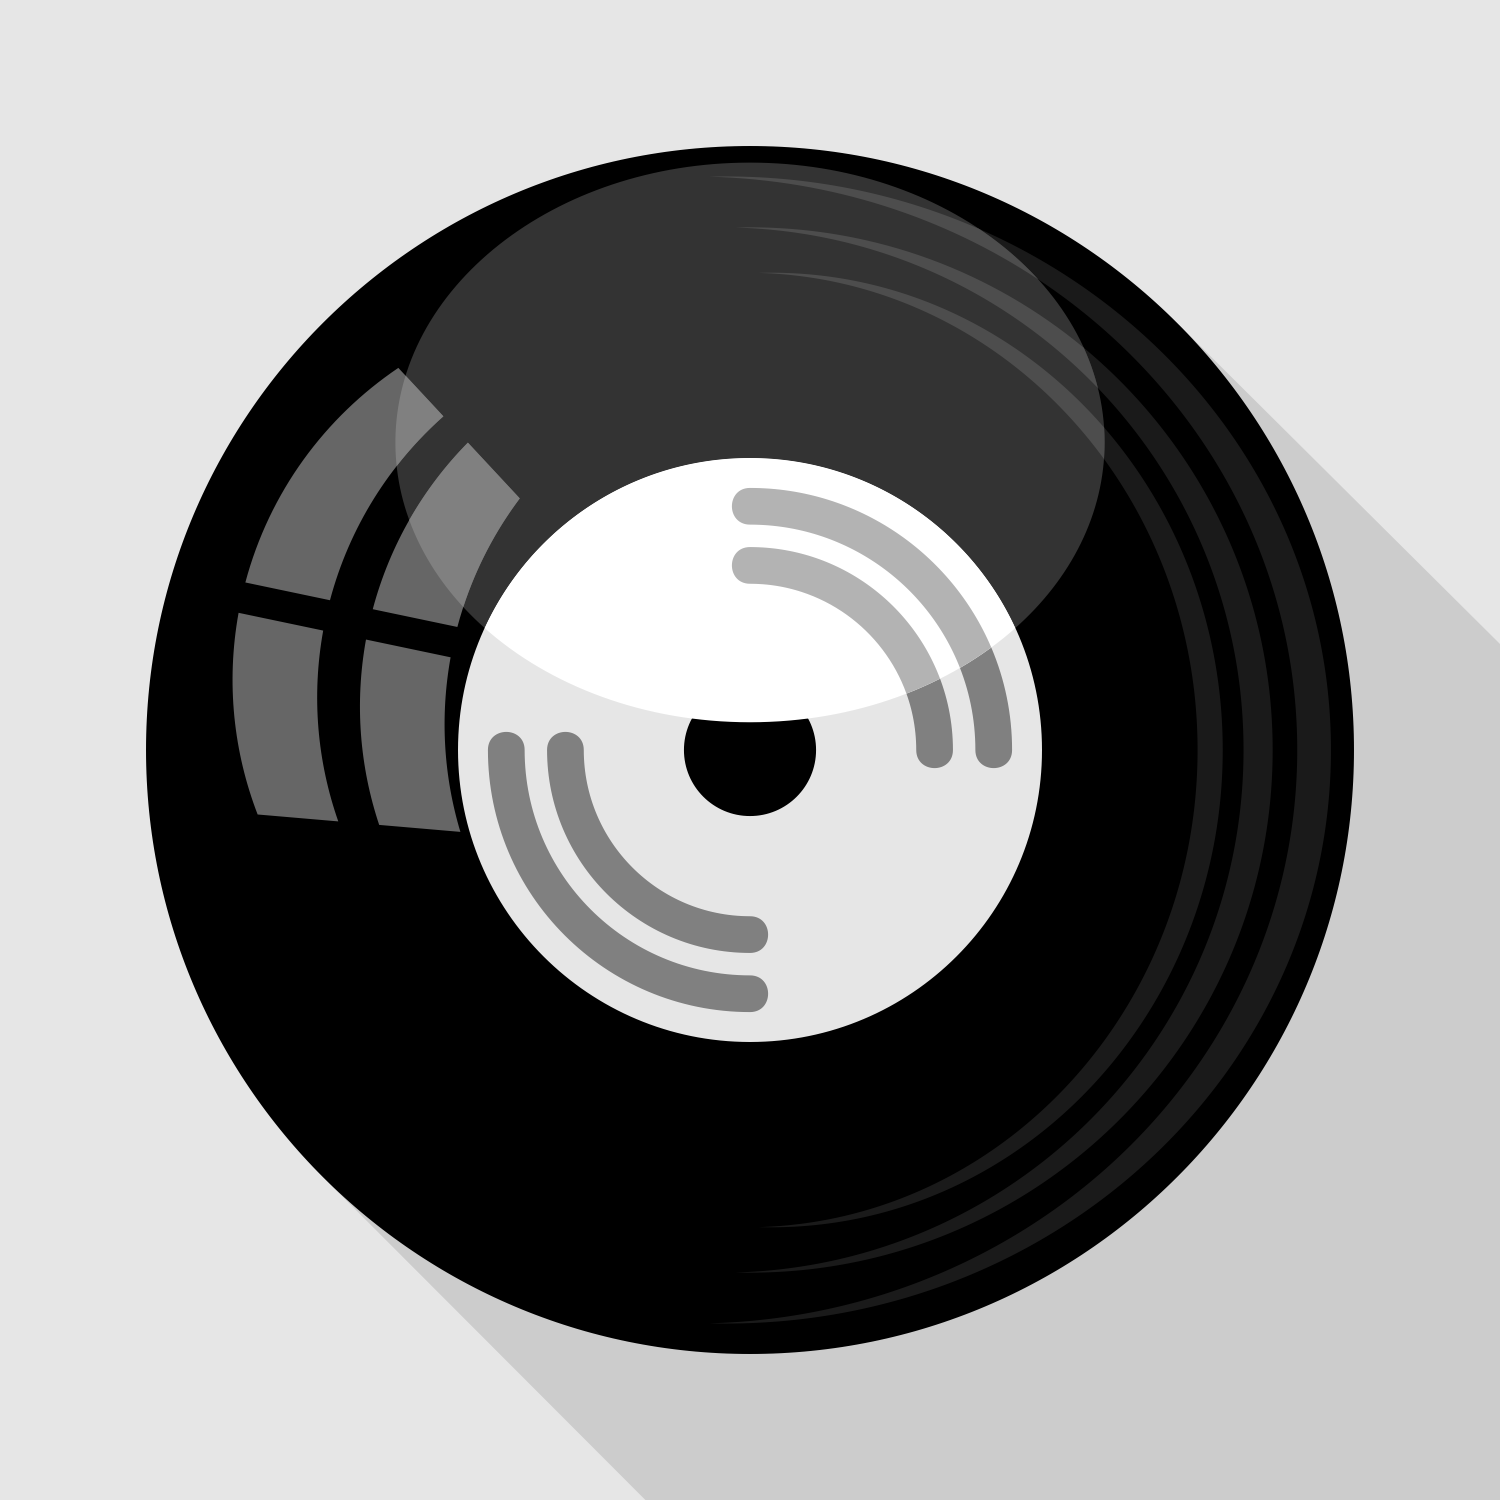 Download Vector for free use: Vinyl record icon